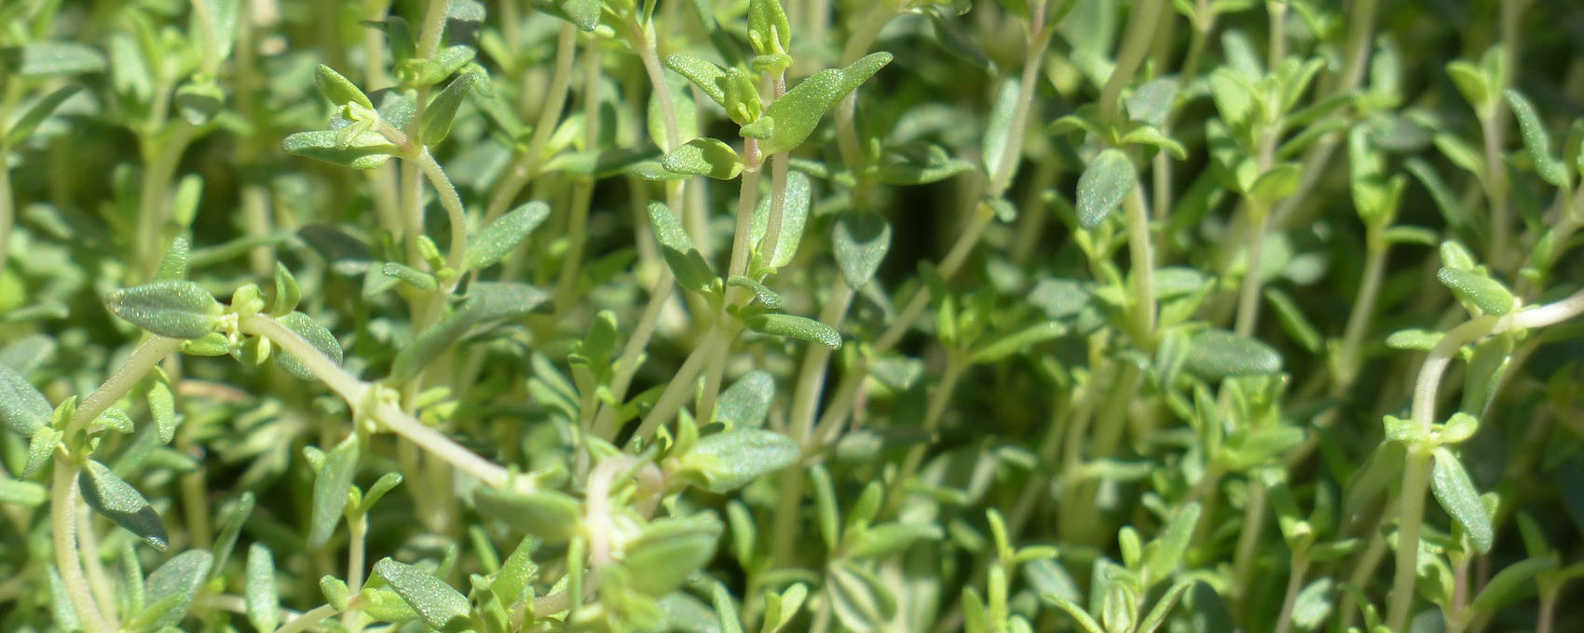 green thyme close up 